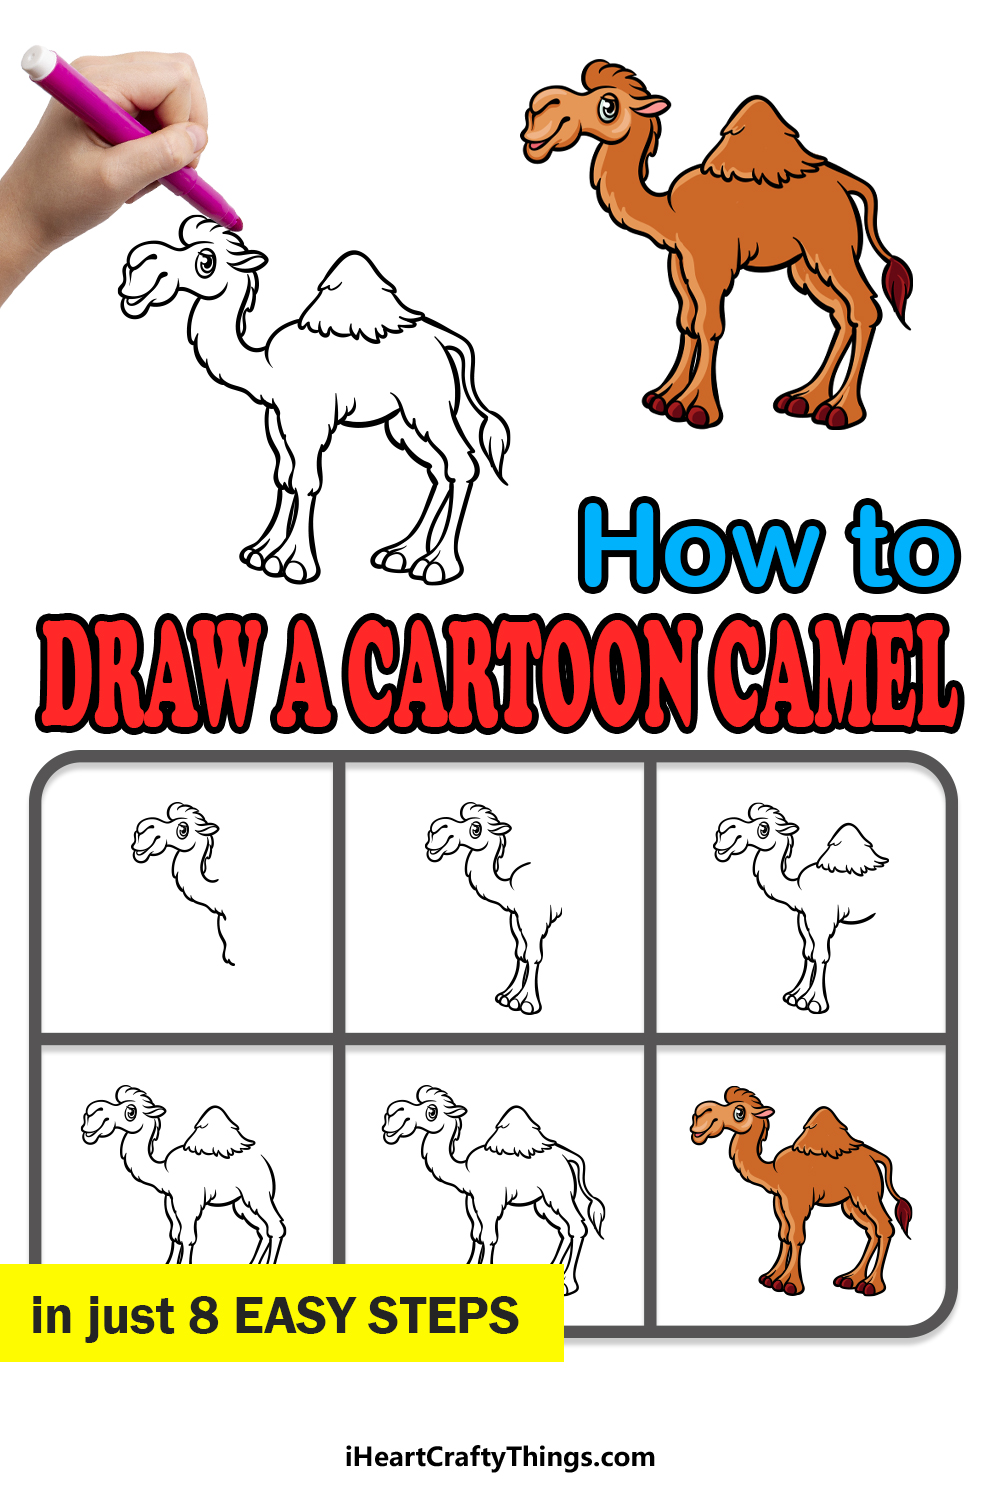 how to draw a cartoon camel in 8 easy steps